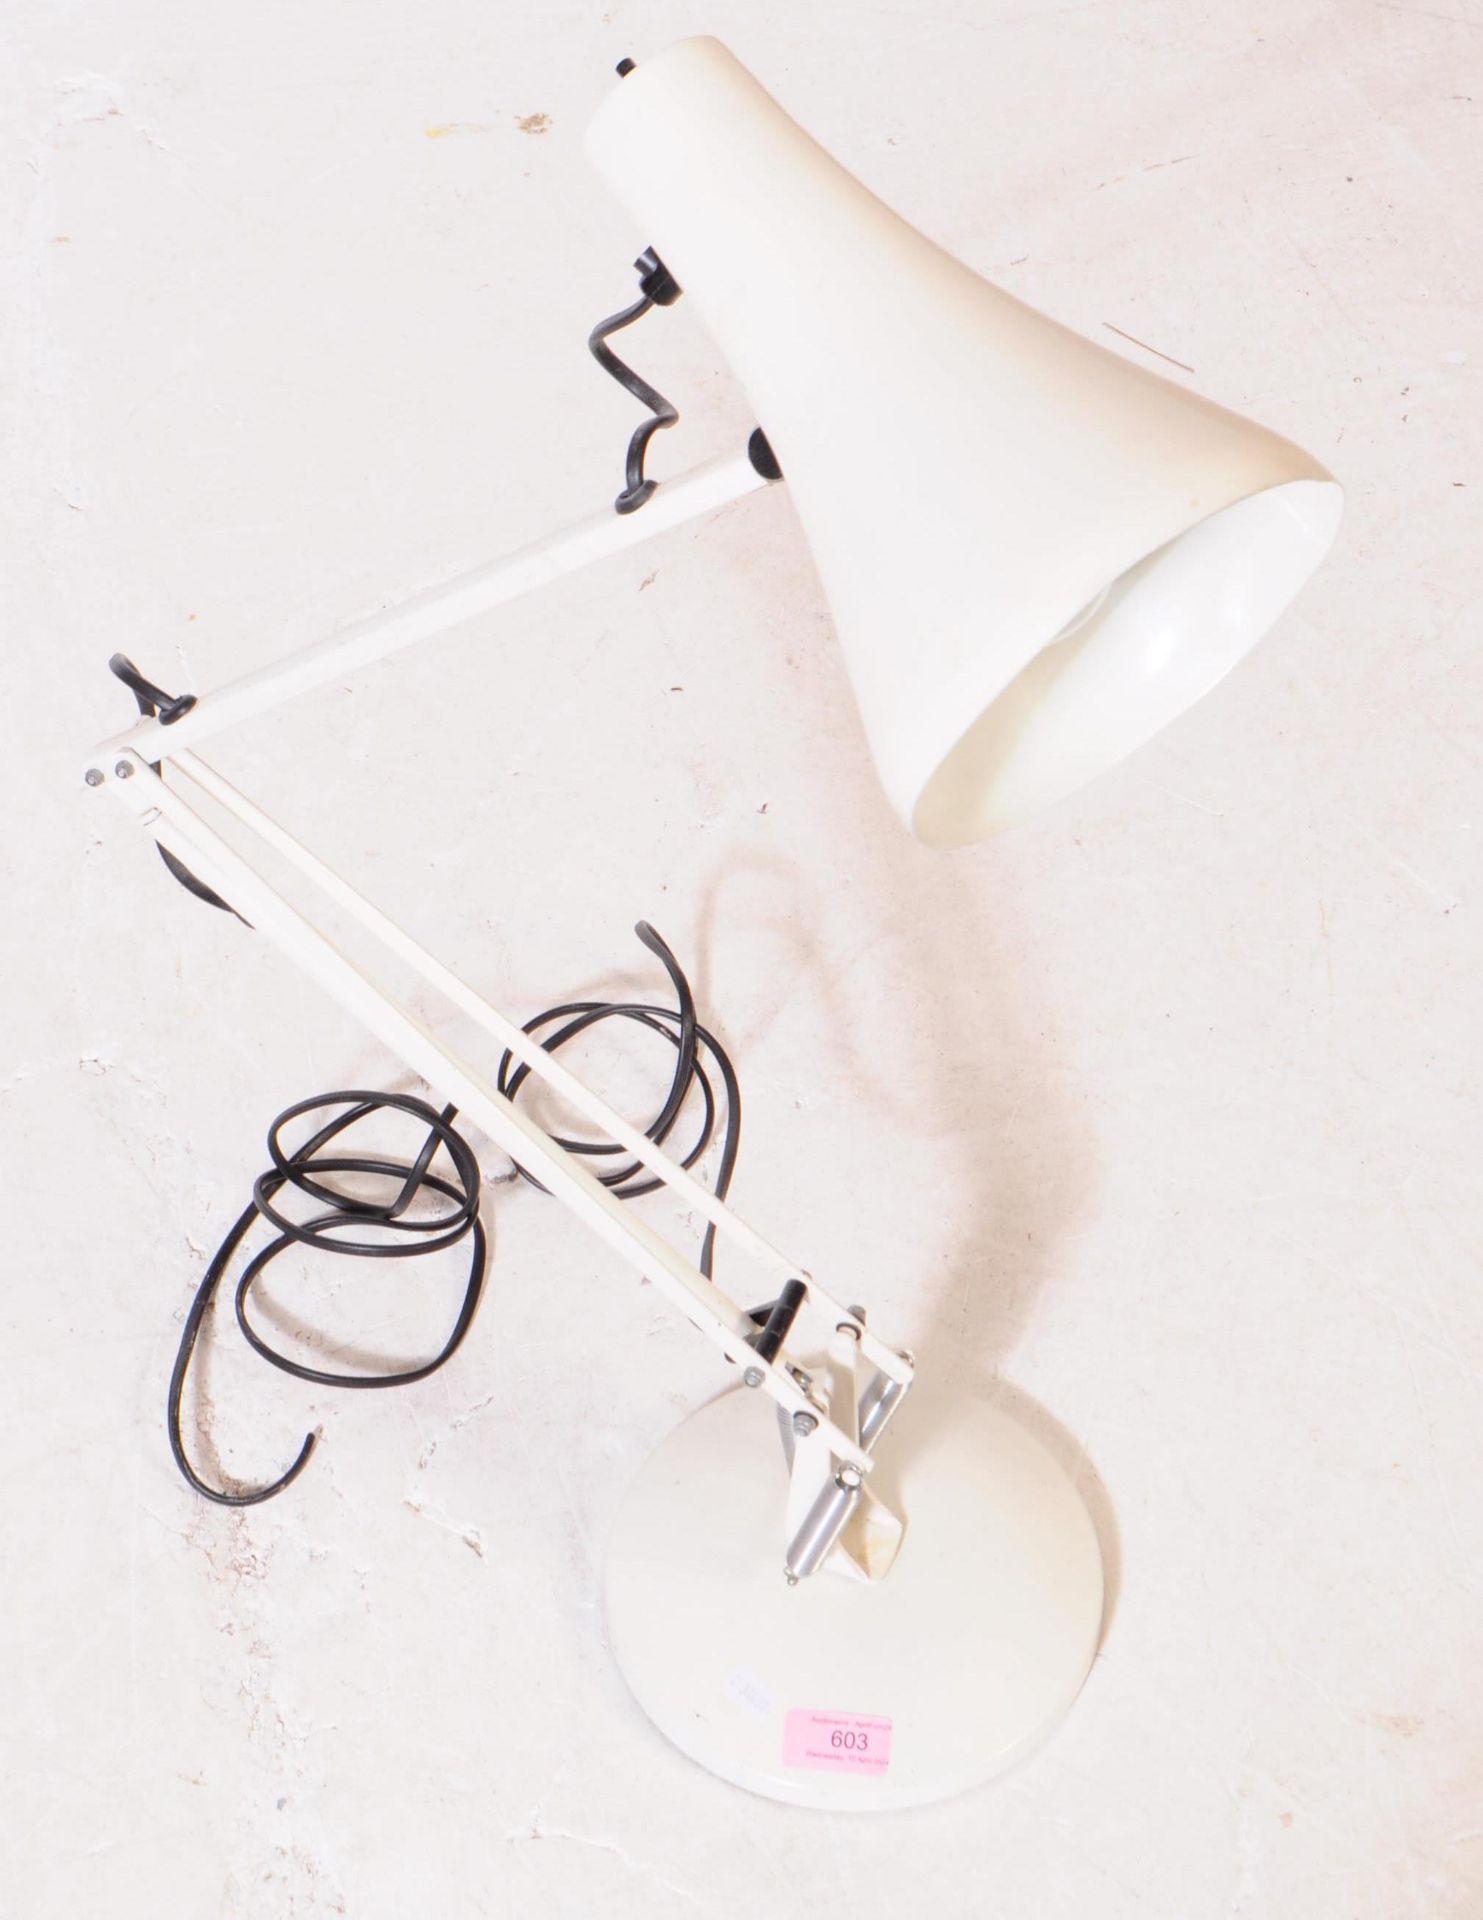 HERBERT TERRY - MID 20TH CENTURY ANGLEPOISE DESK LAMP - Image 2 of 4